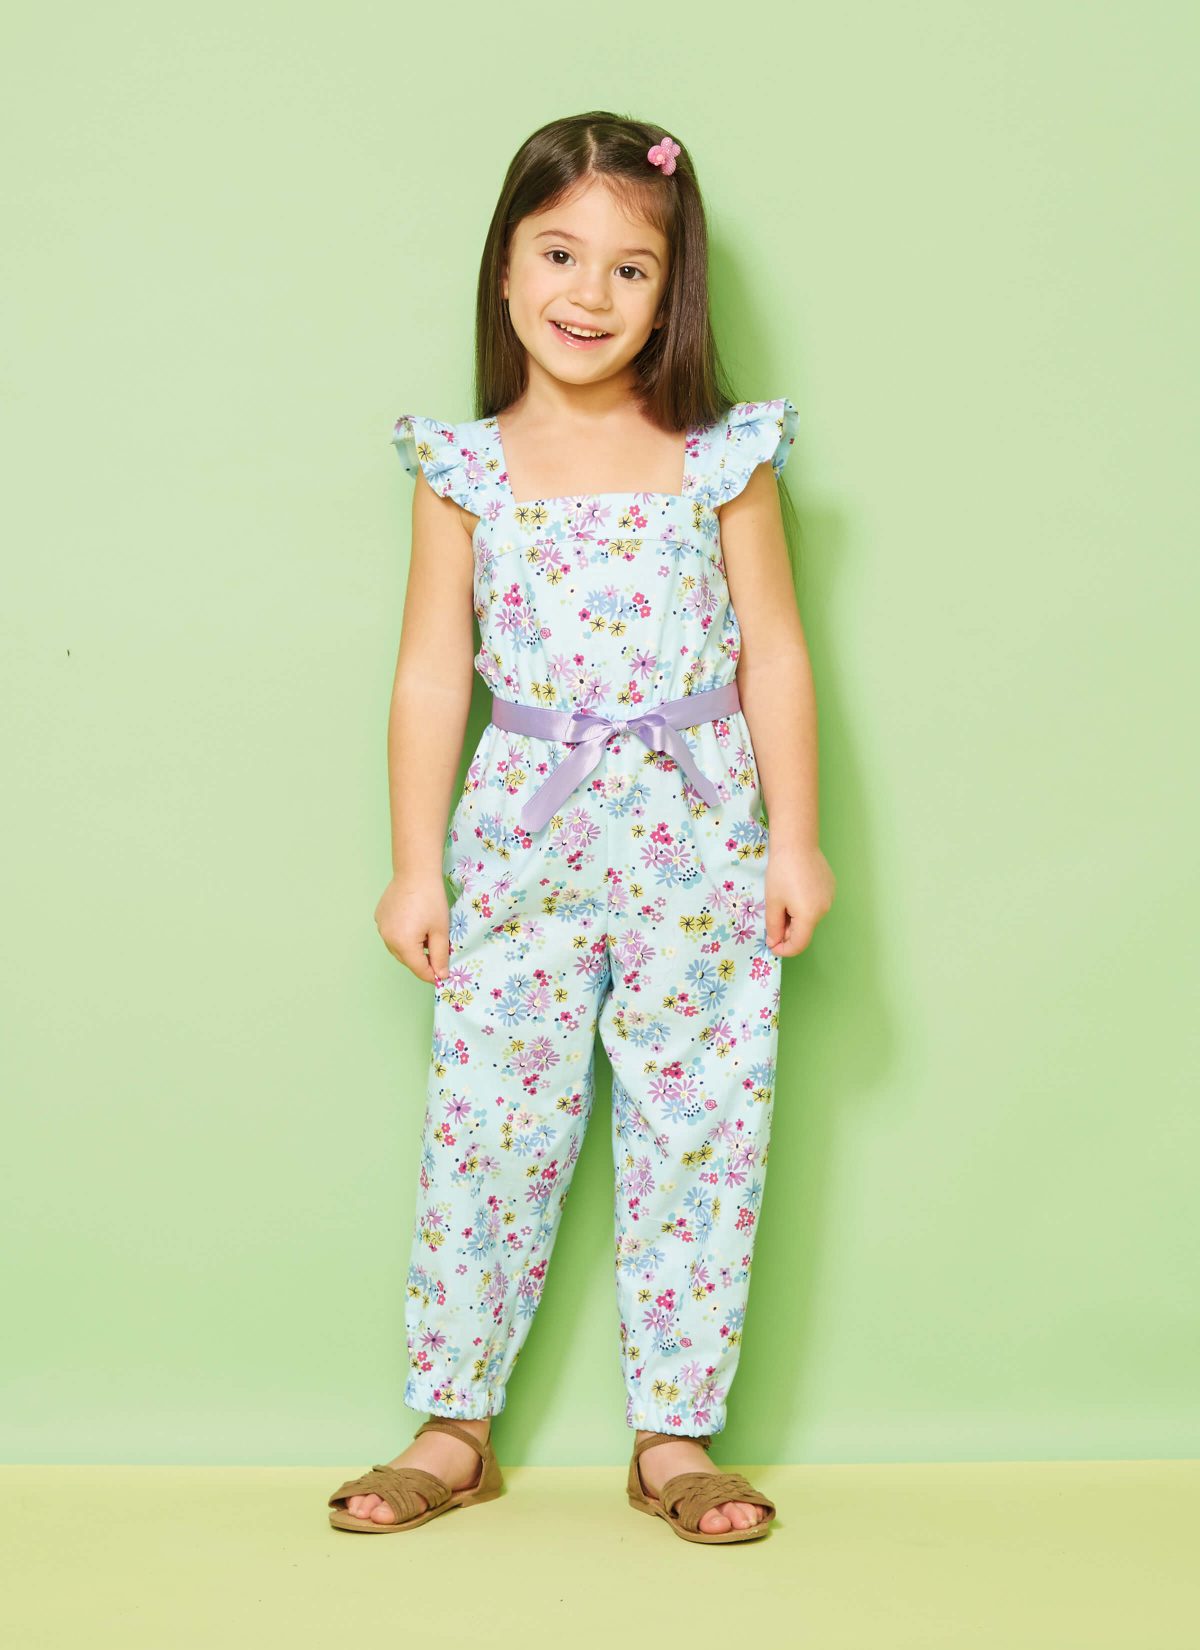 Butterick Sewing Pattern B6907 Children's Romper, Jumpsuit and Sash